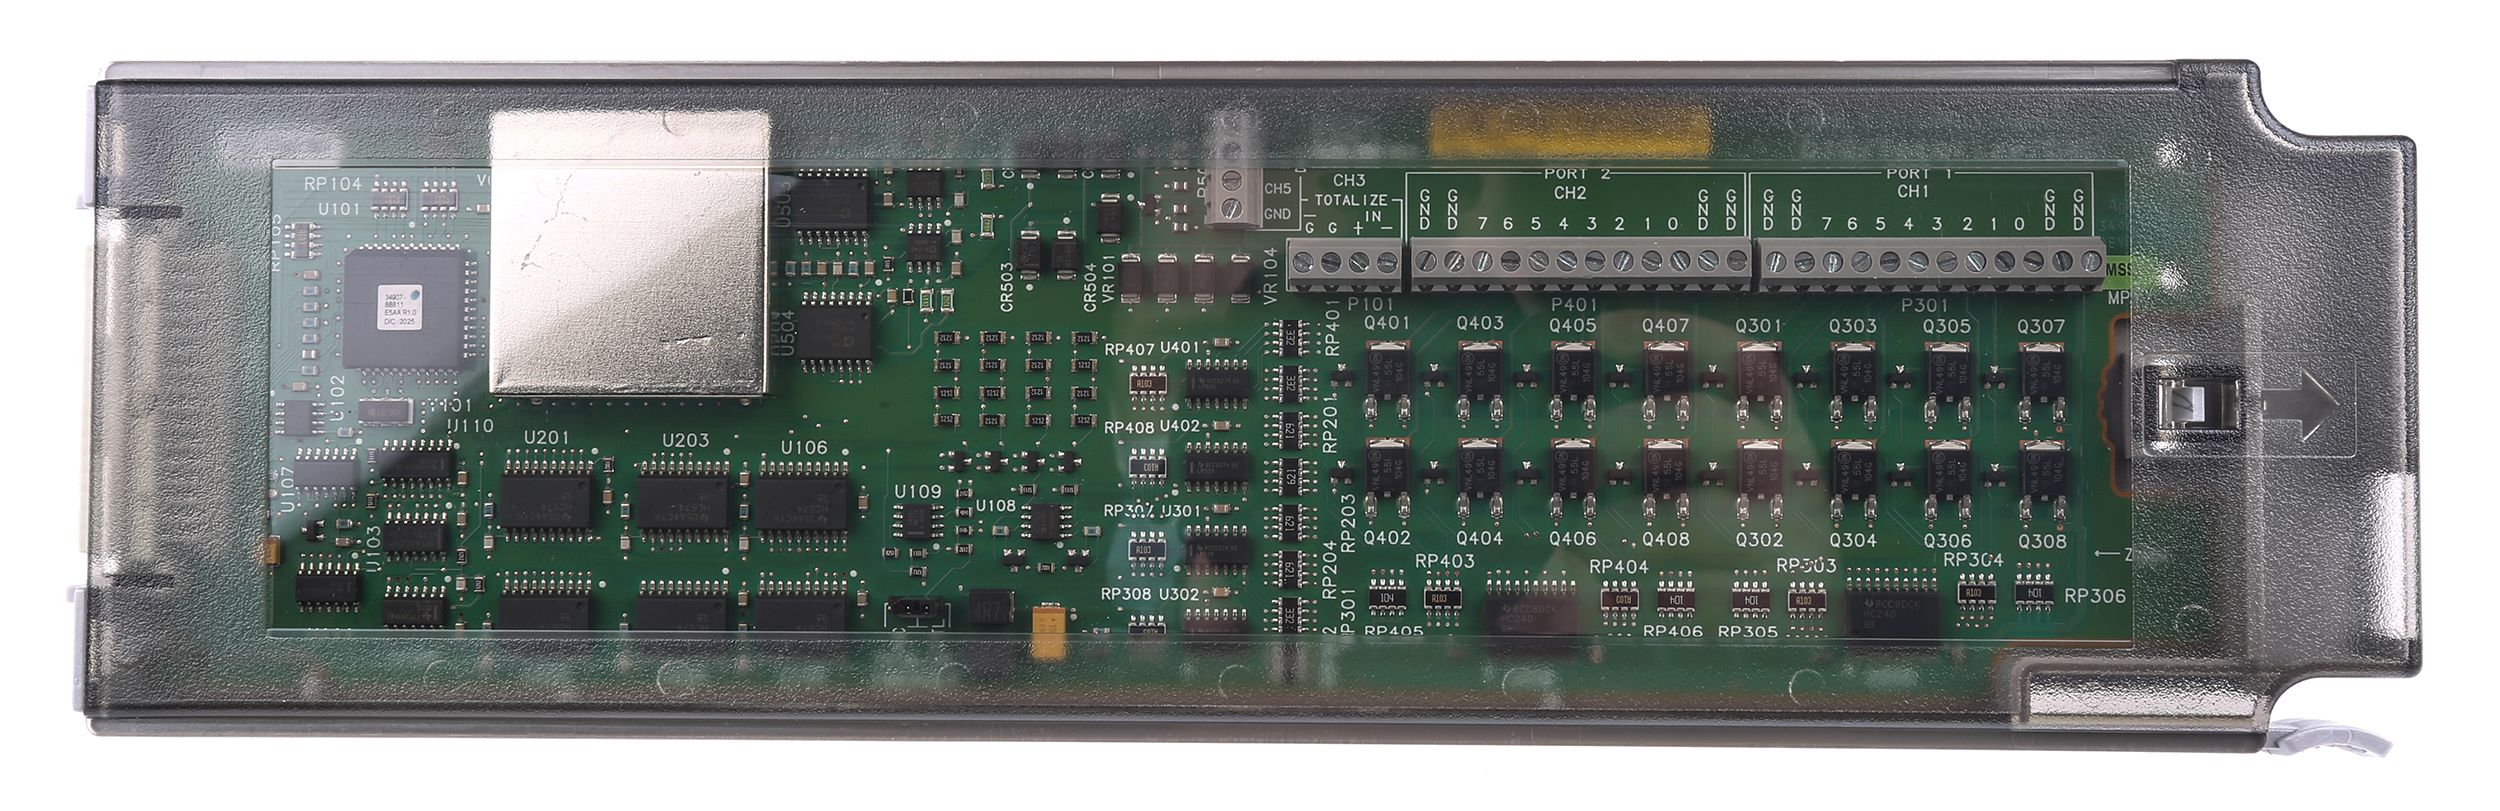 Keysight Technologies Data Acquisition Multiplexer for Use with Data Acquisition & Switch Unit